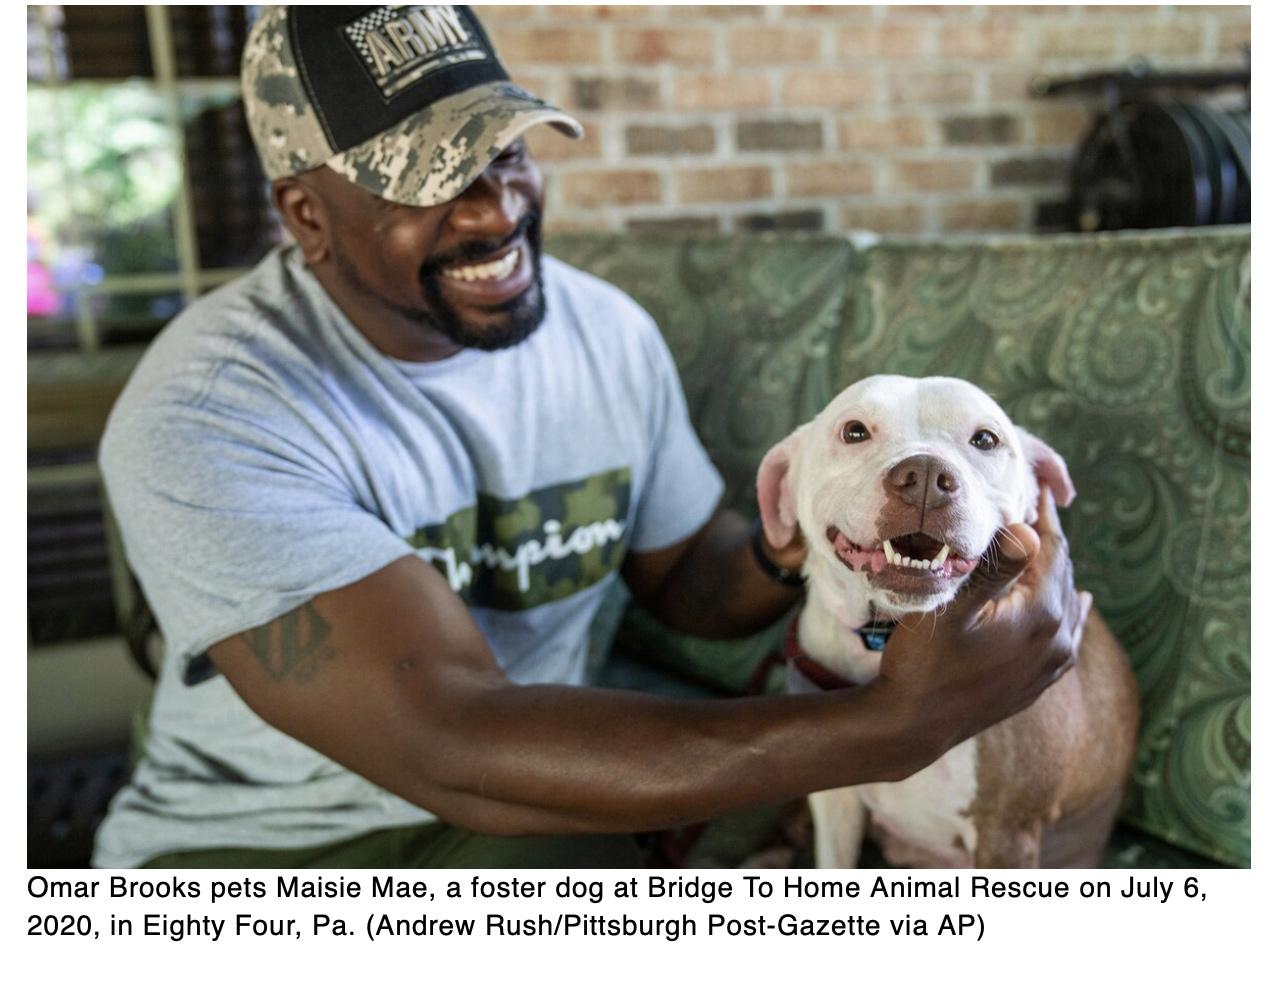  Army vet finds peace fostering pets, finding them homes